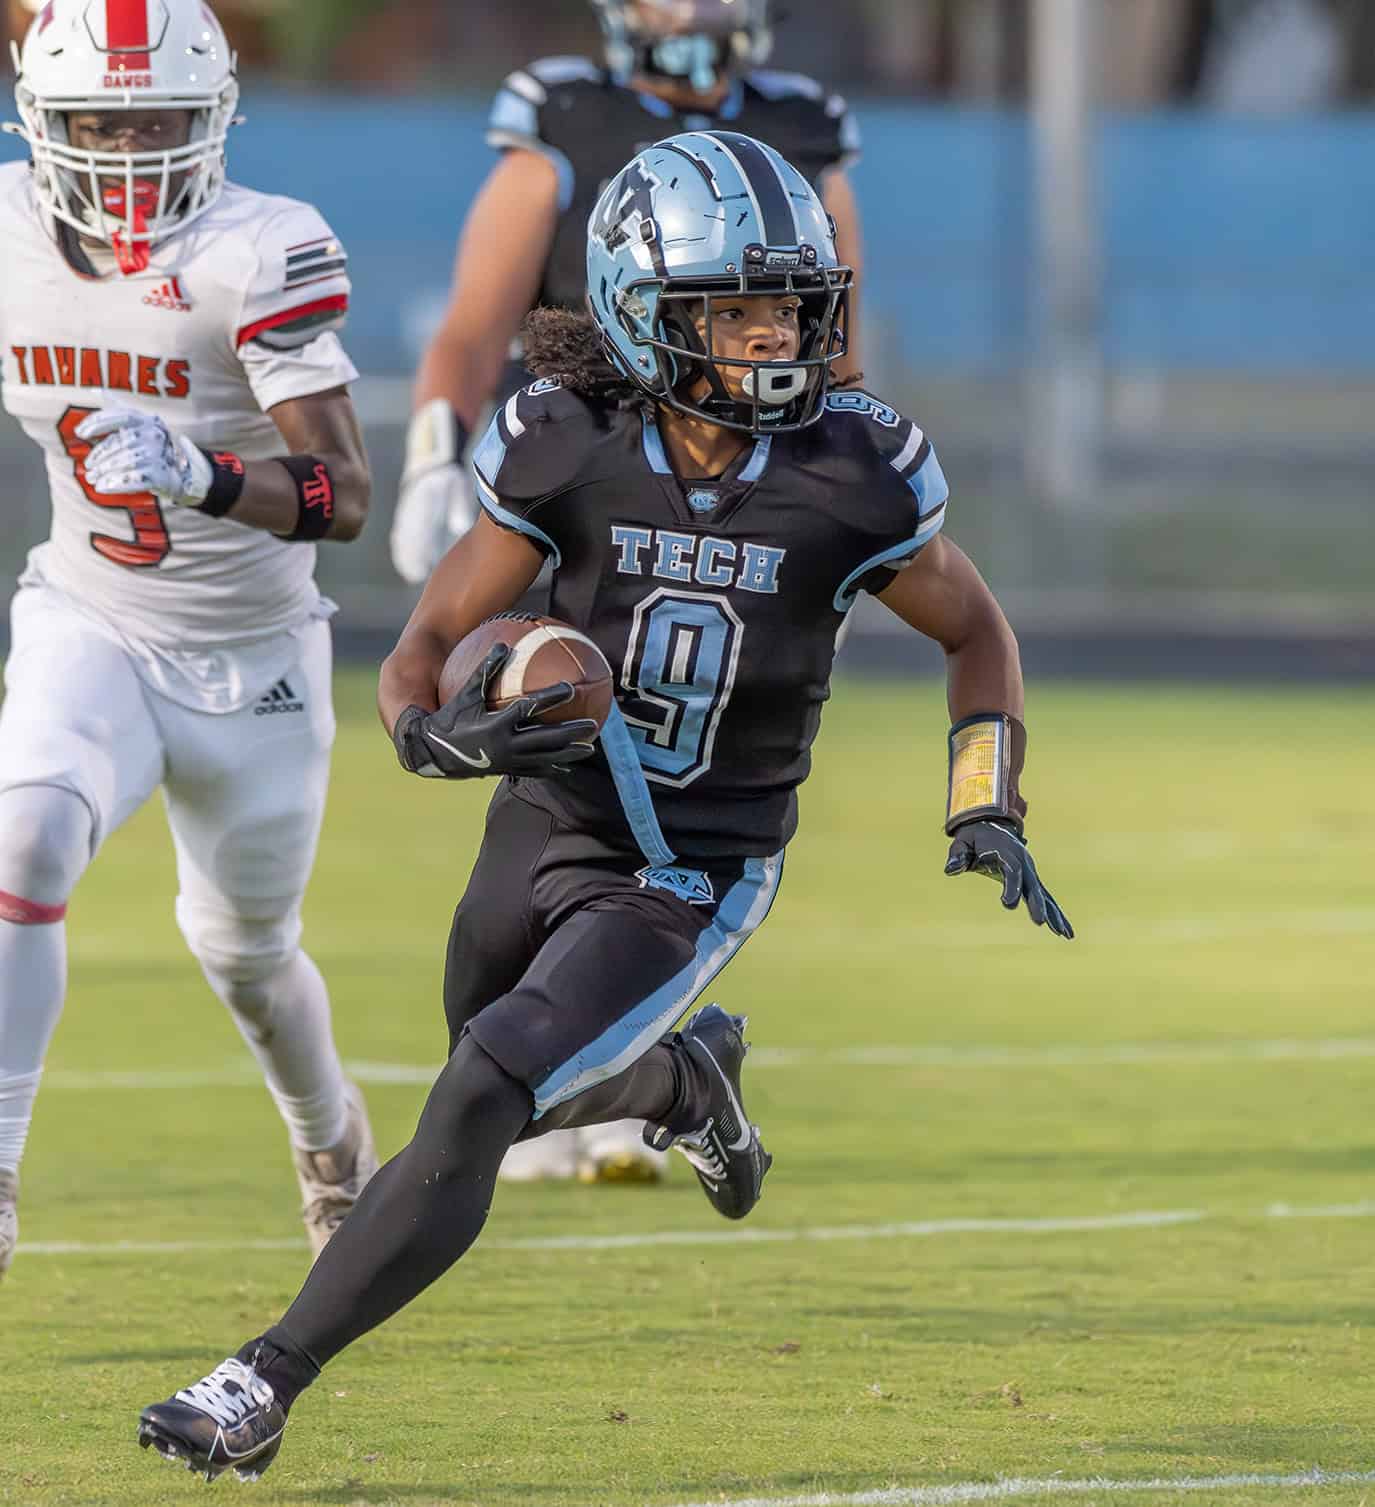 Nature Coast Tech, 9, Jasir Harvin finds running room in the game with visiting Tavares High School Friday in Brooksville. Photo by [Joseph DiCristofalo]